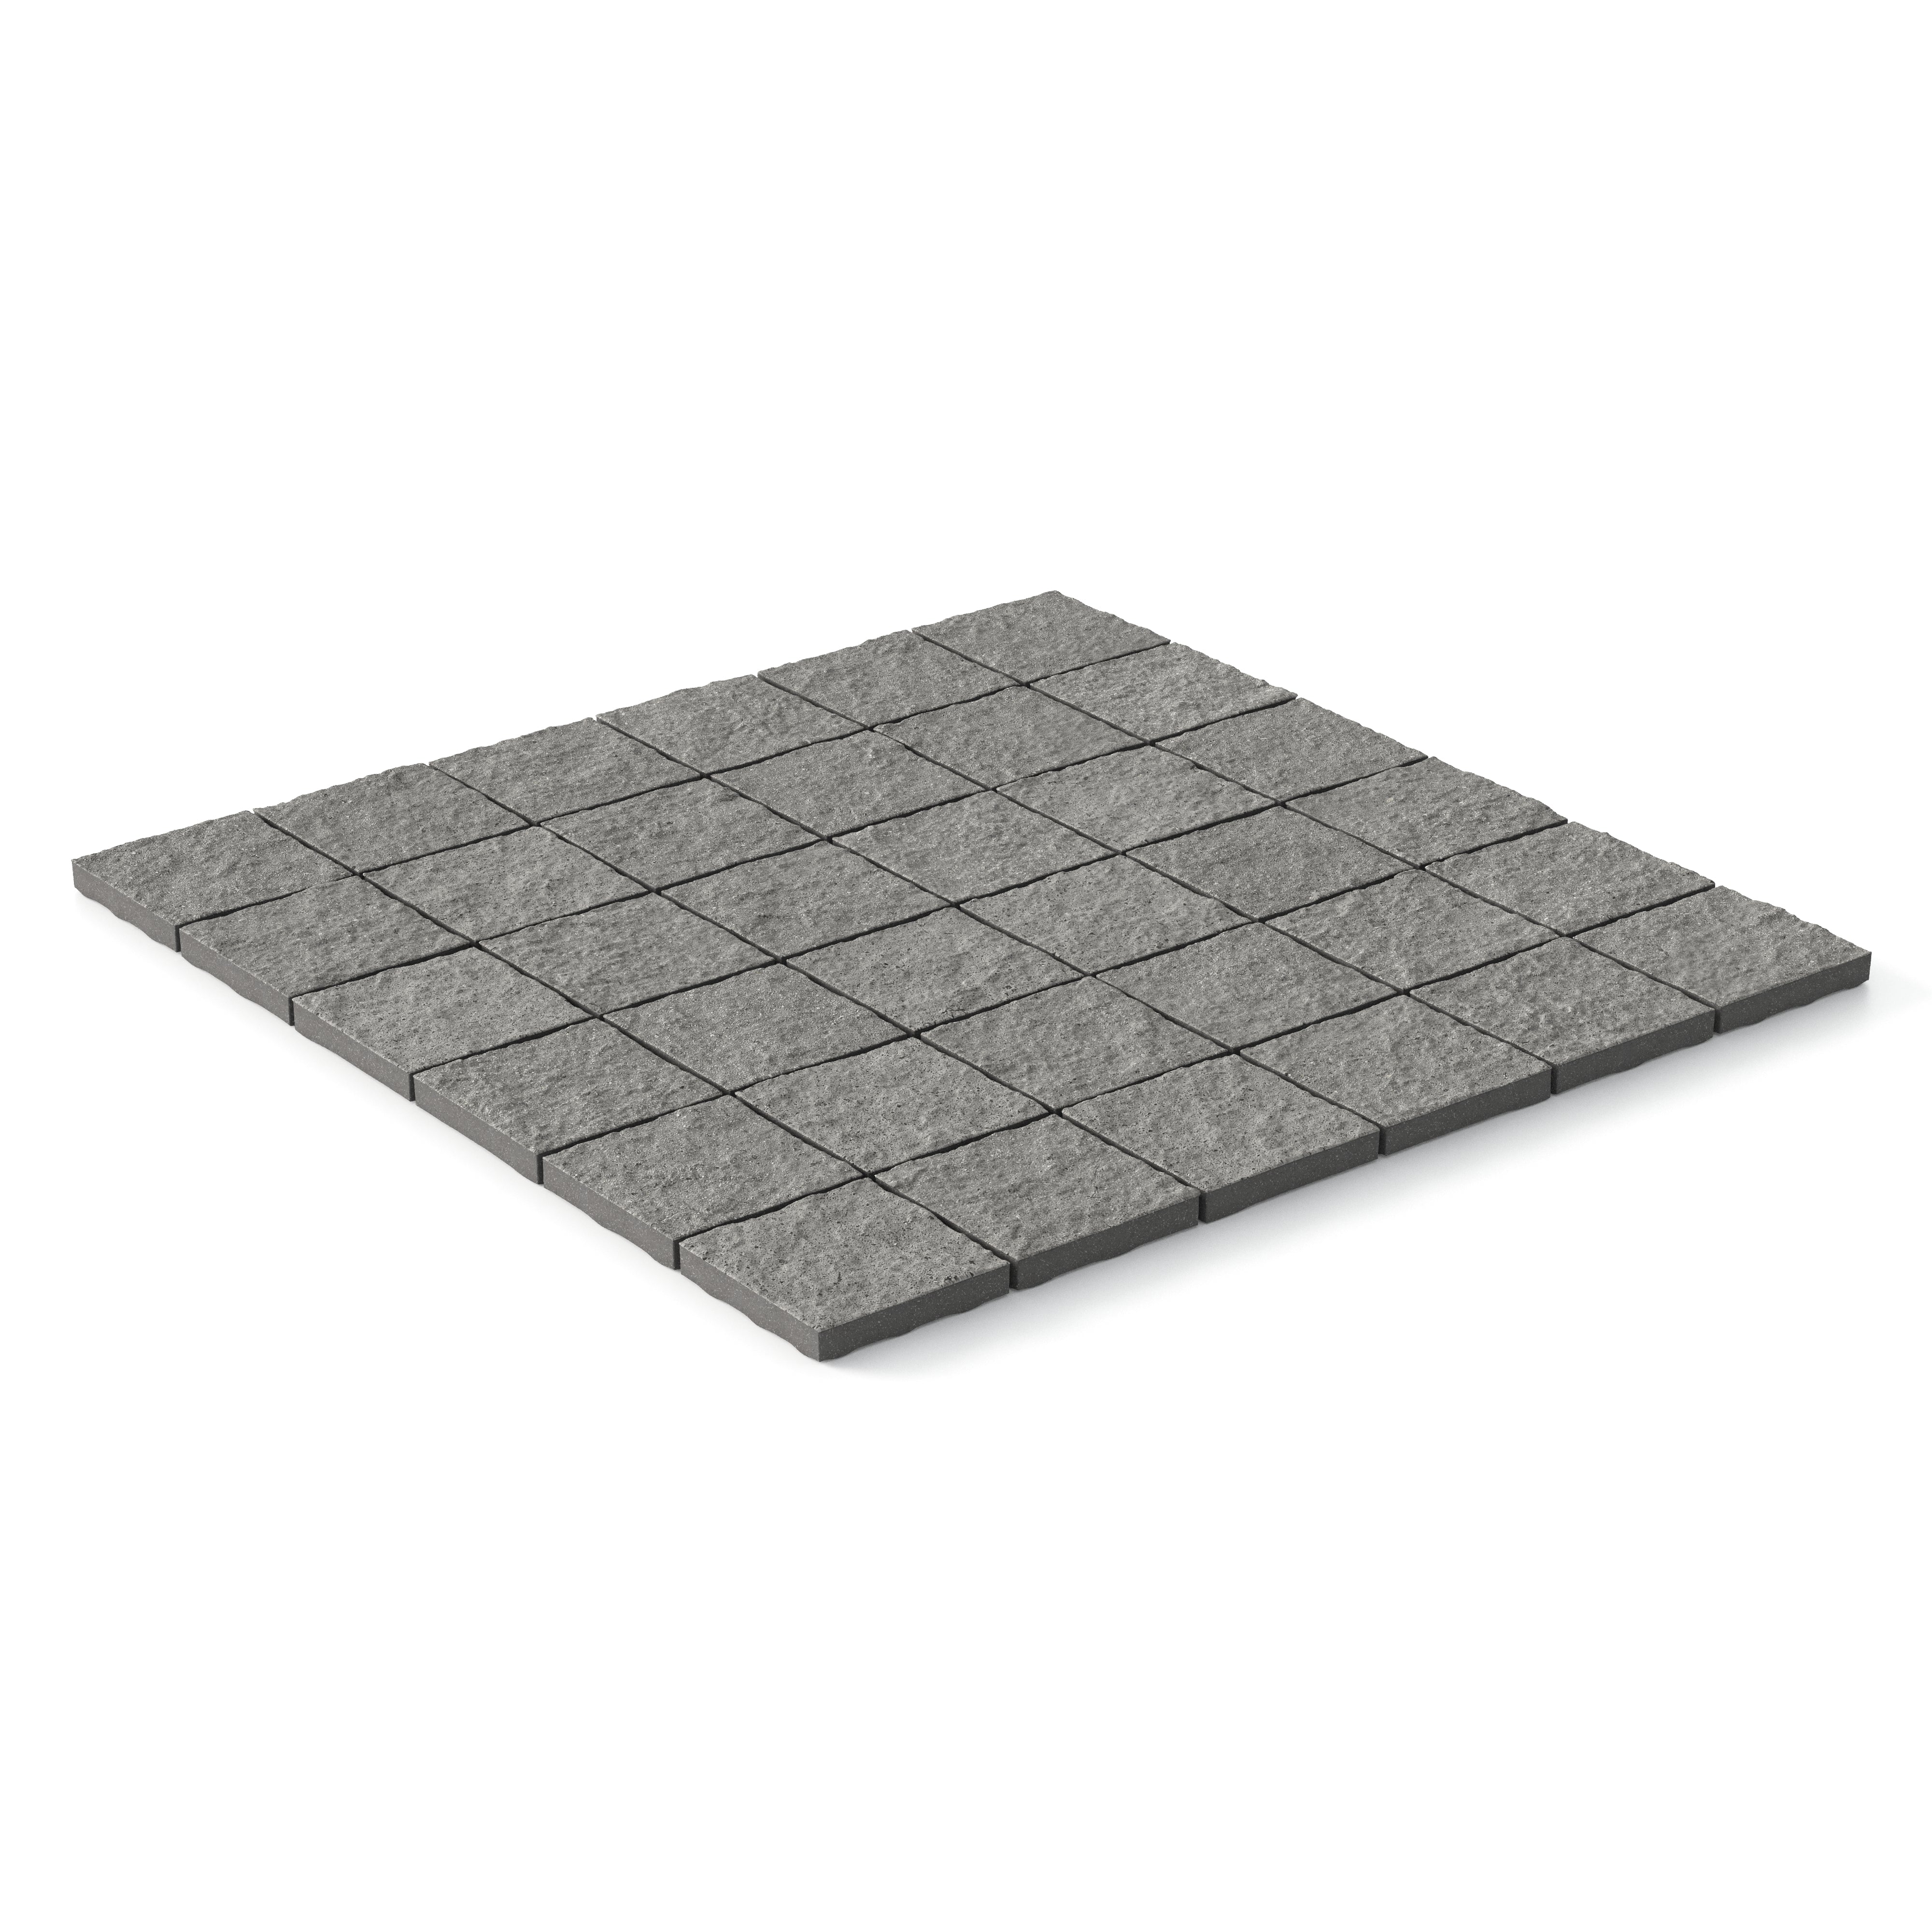 Palmer 2x2 Raw Porcelain Mosaic Tile in Charcoal